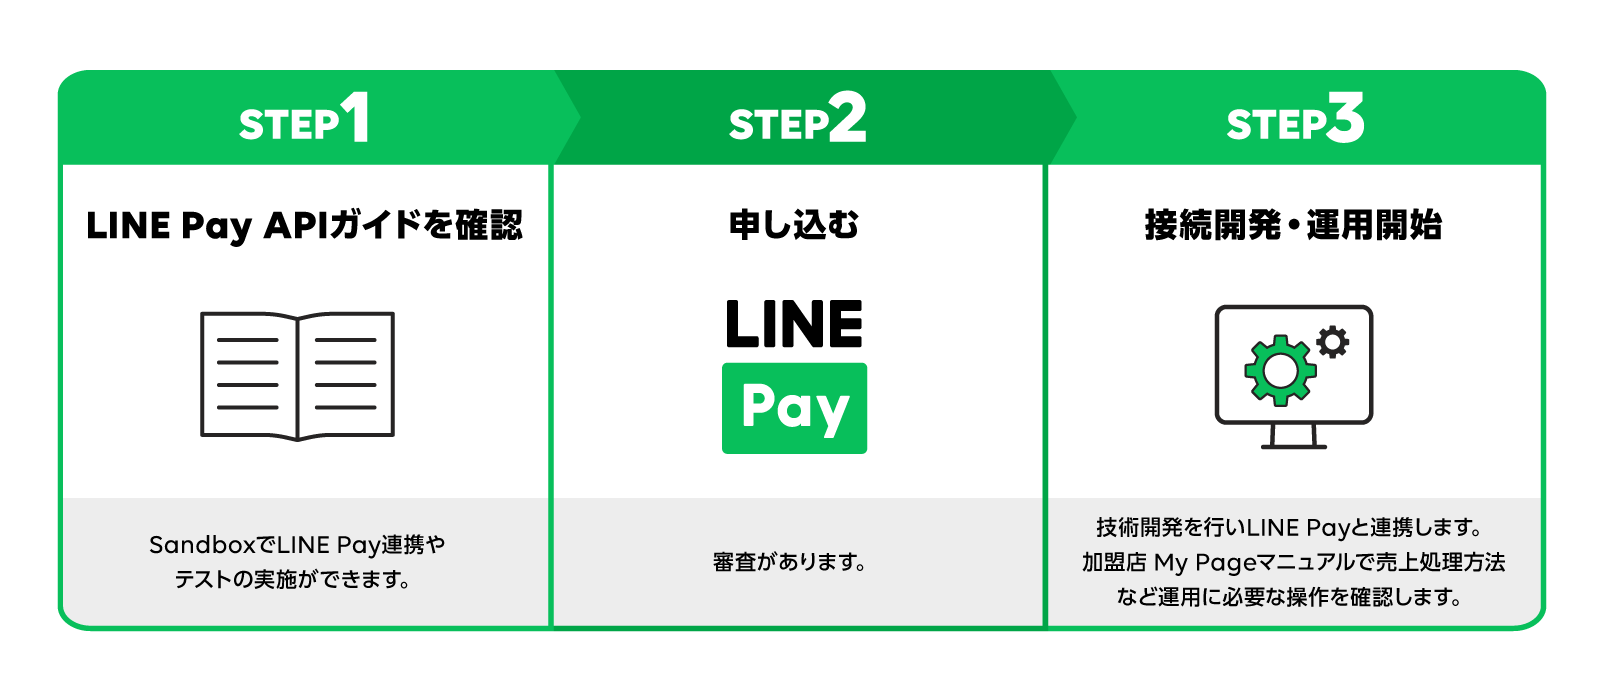 20211005-online-step-02-re1-3.png